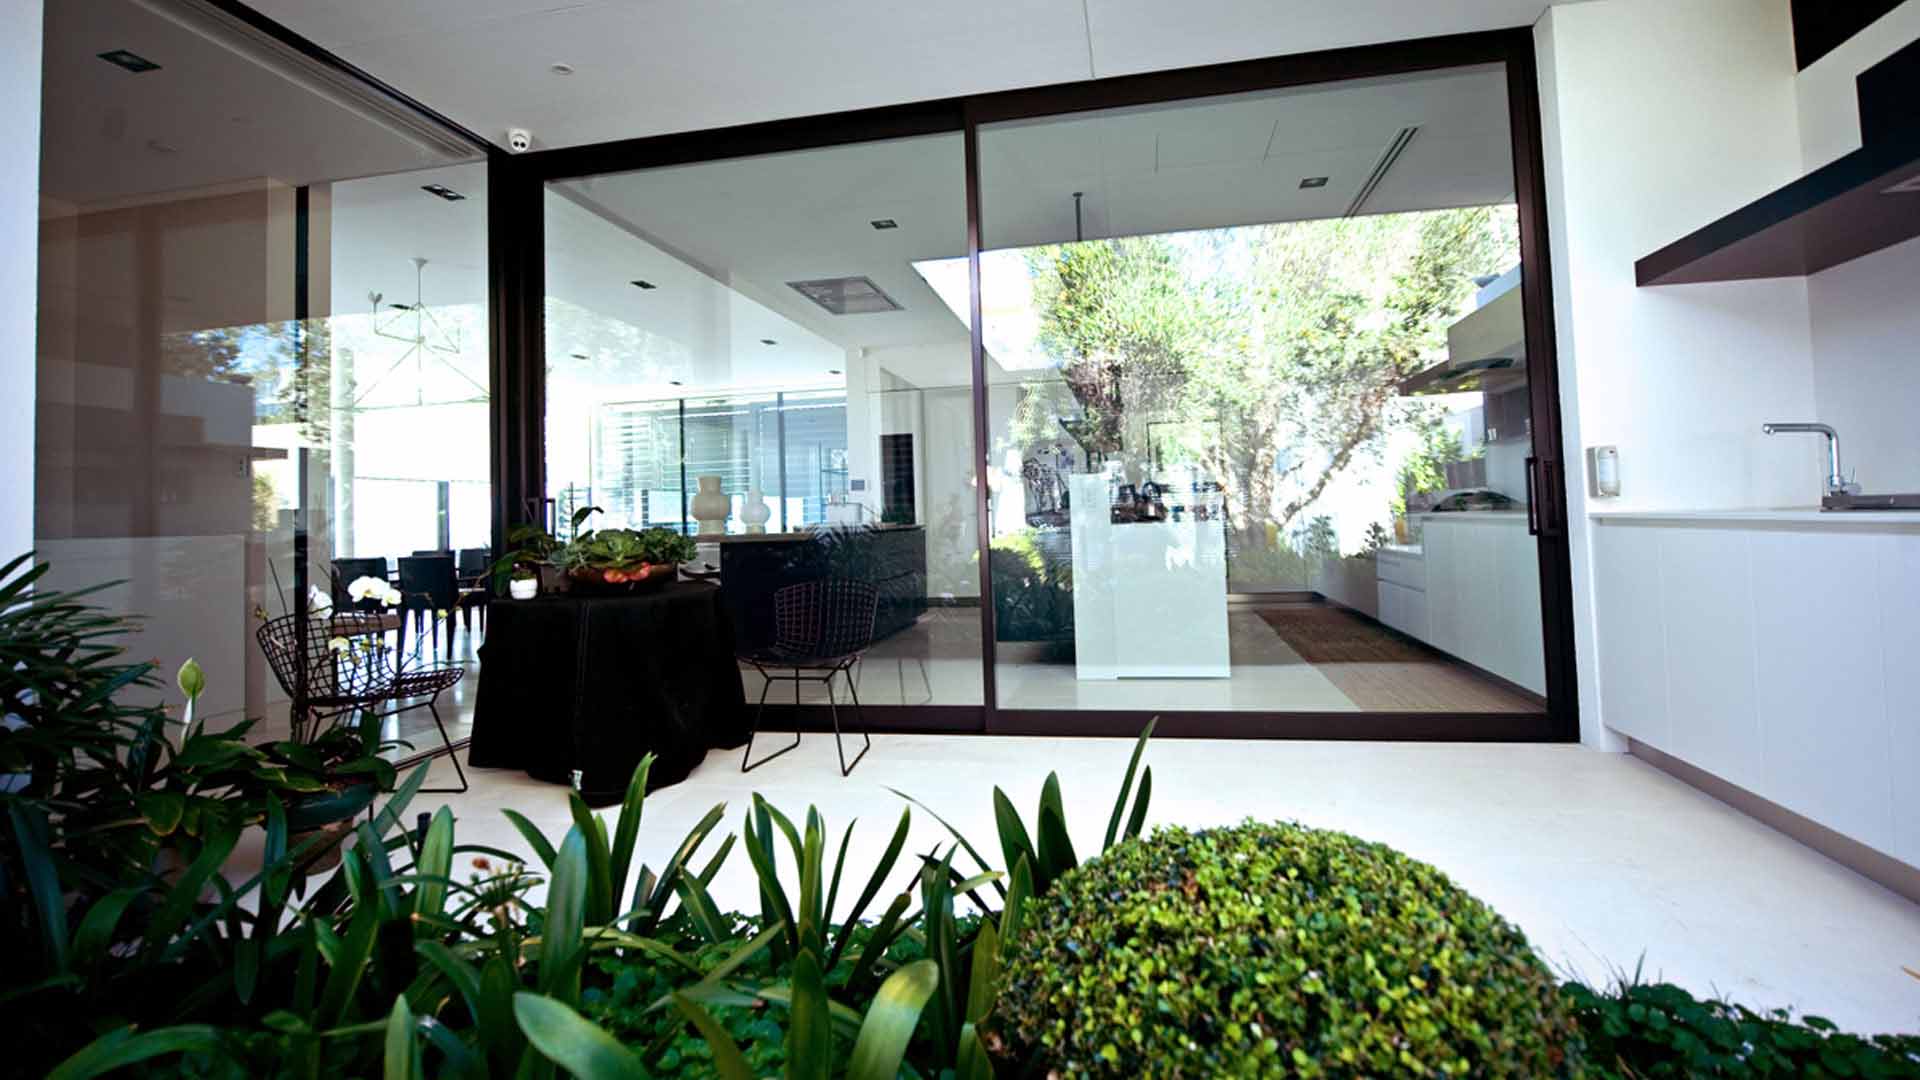 Quality Glass Installation for Sliding Doors